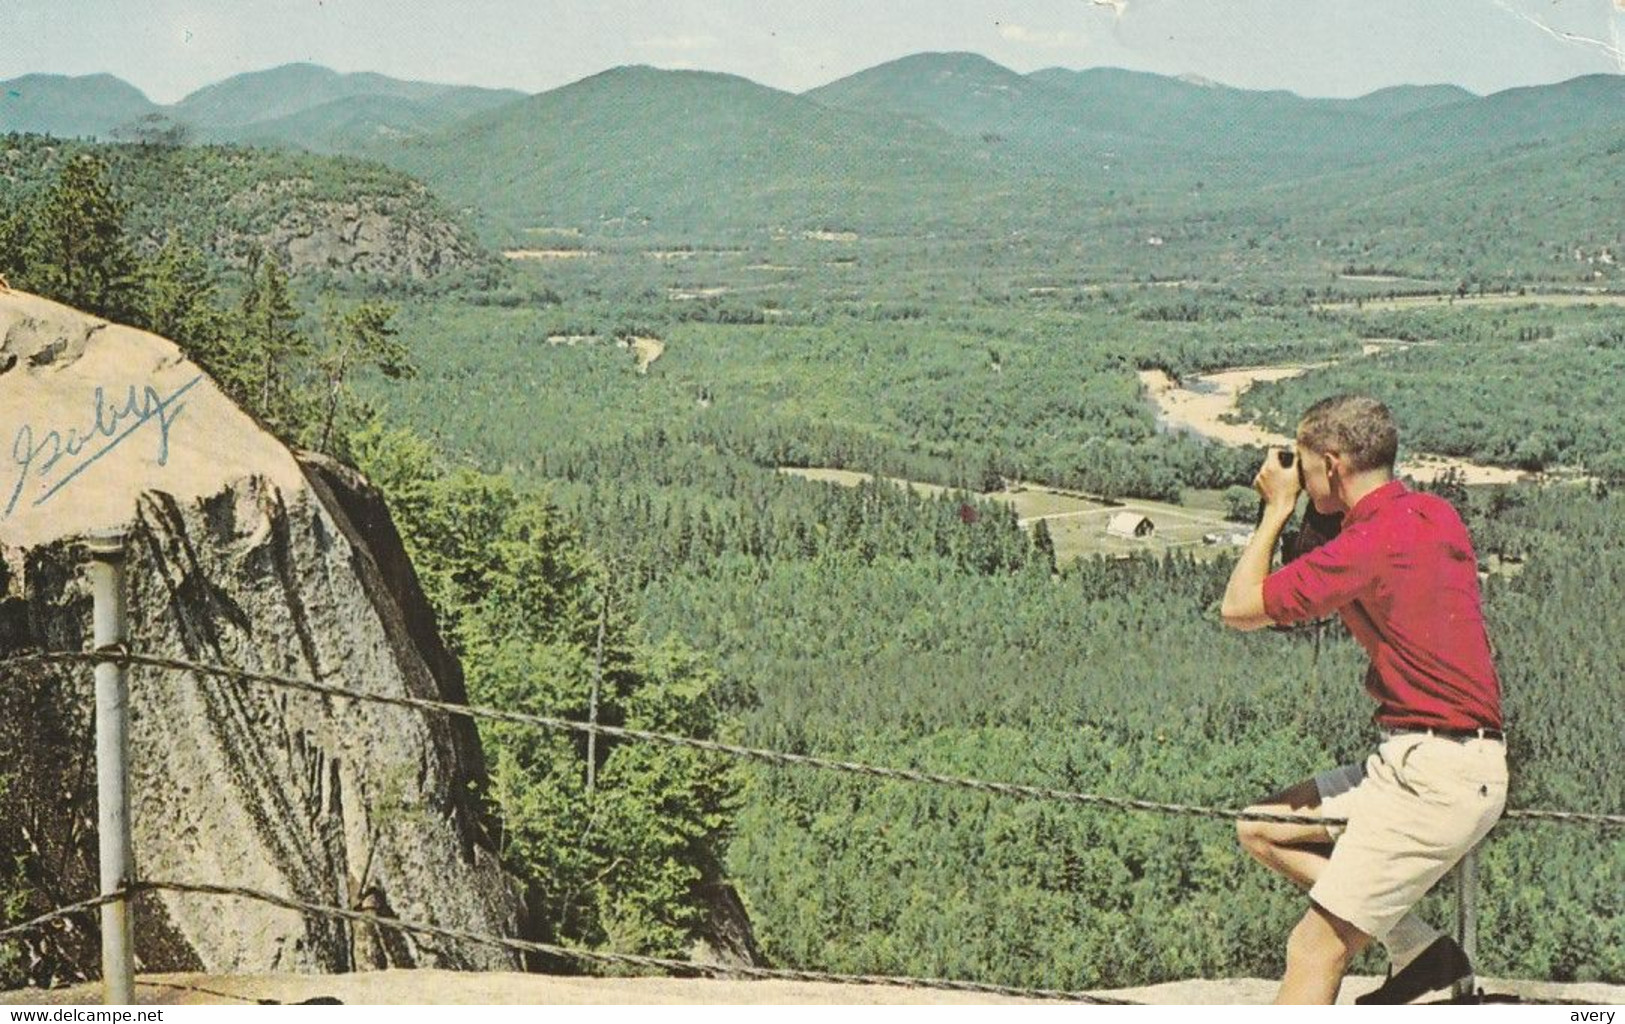 Cathedral Ledge, North Conway, New Hampshire - White Mountains